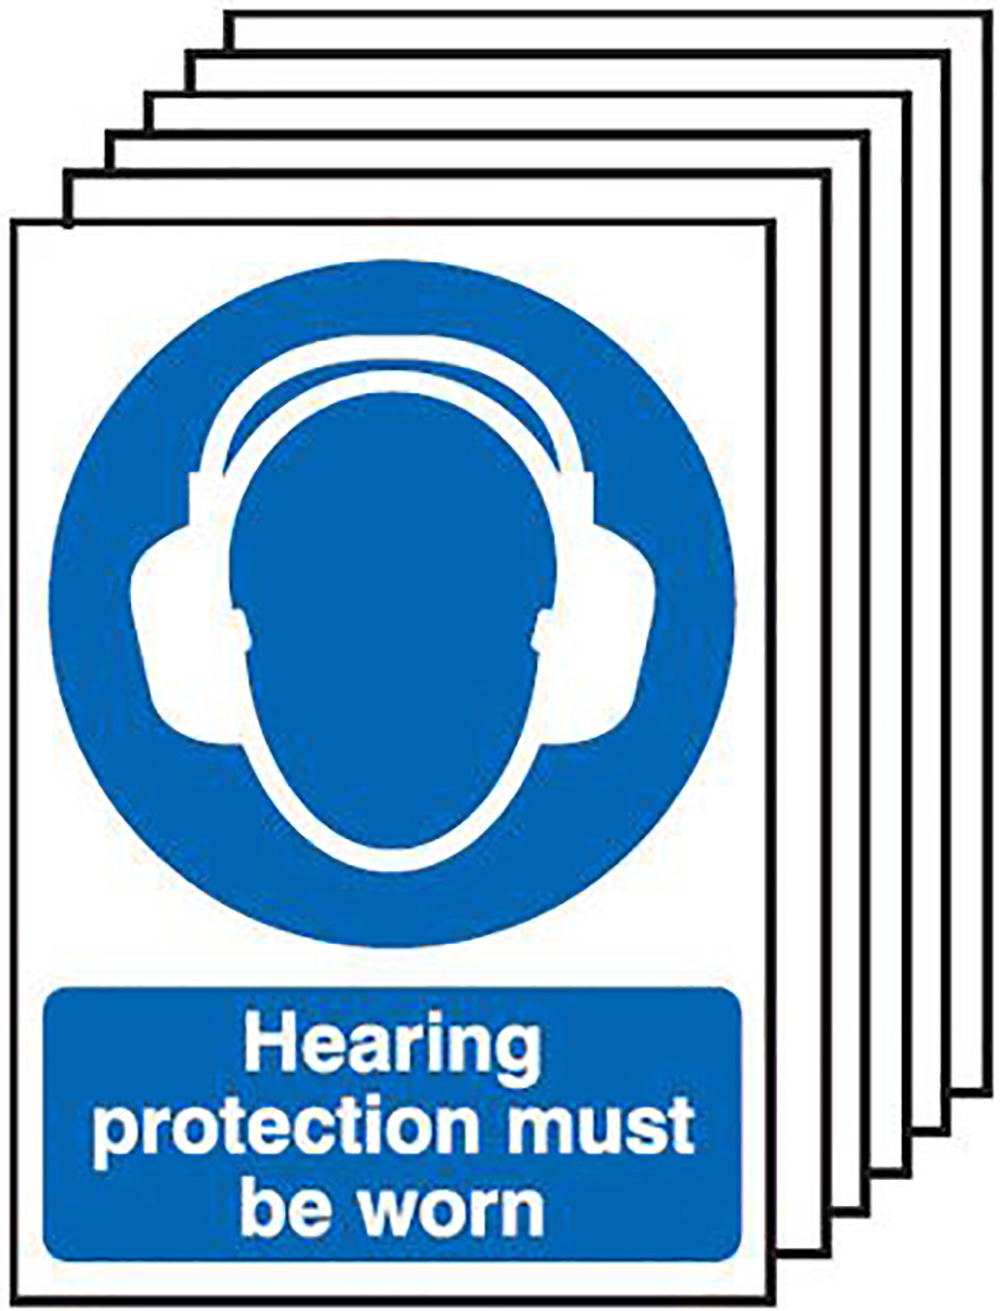 Hearing Protection Must Be Worn  297x210mm 1.2mm Rigid Plastic Safety Sign Pack of 6 